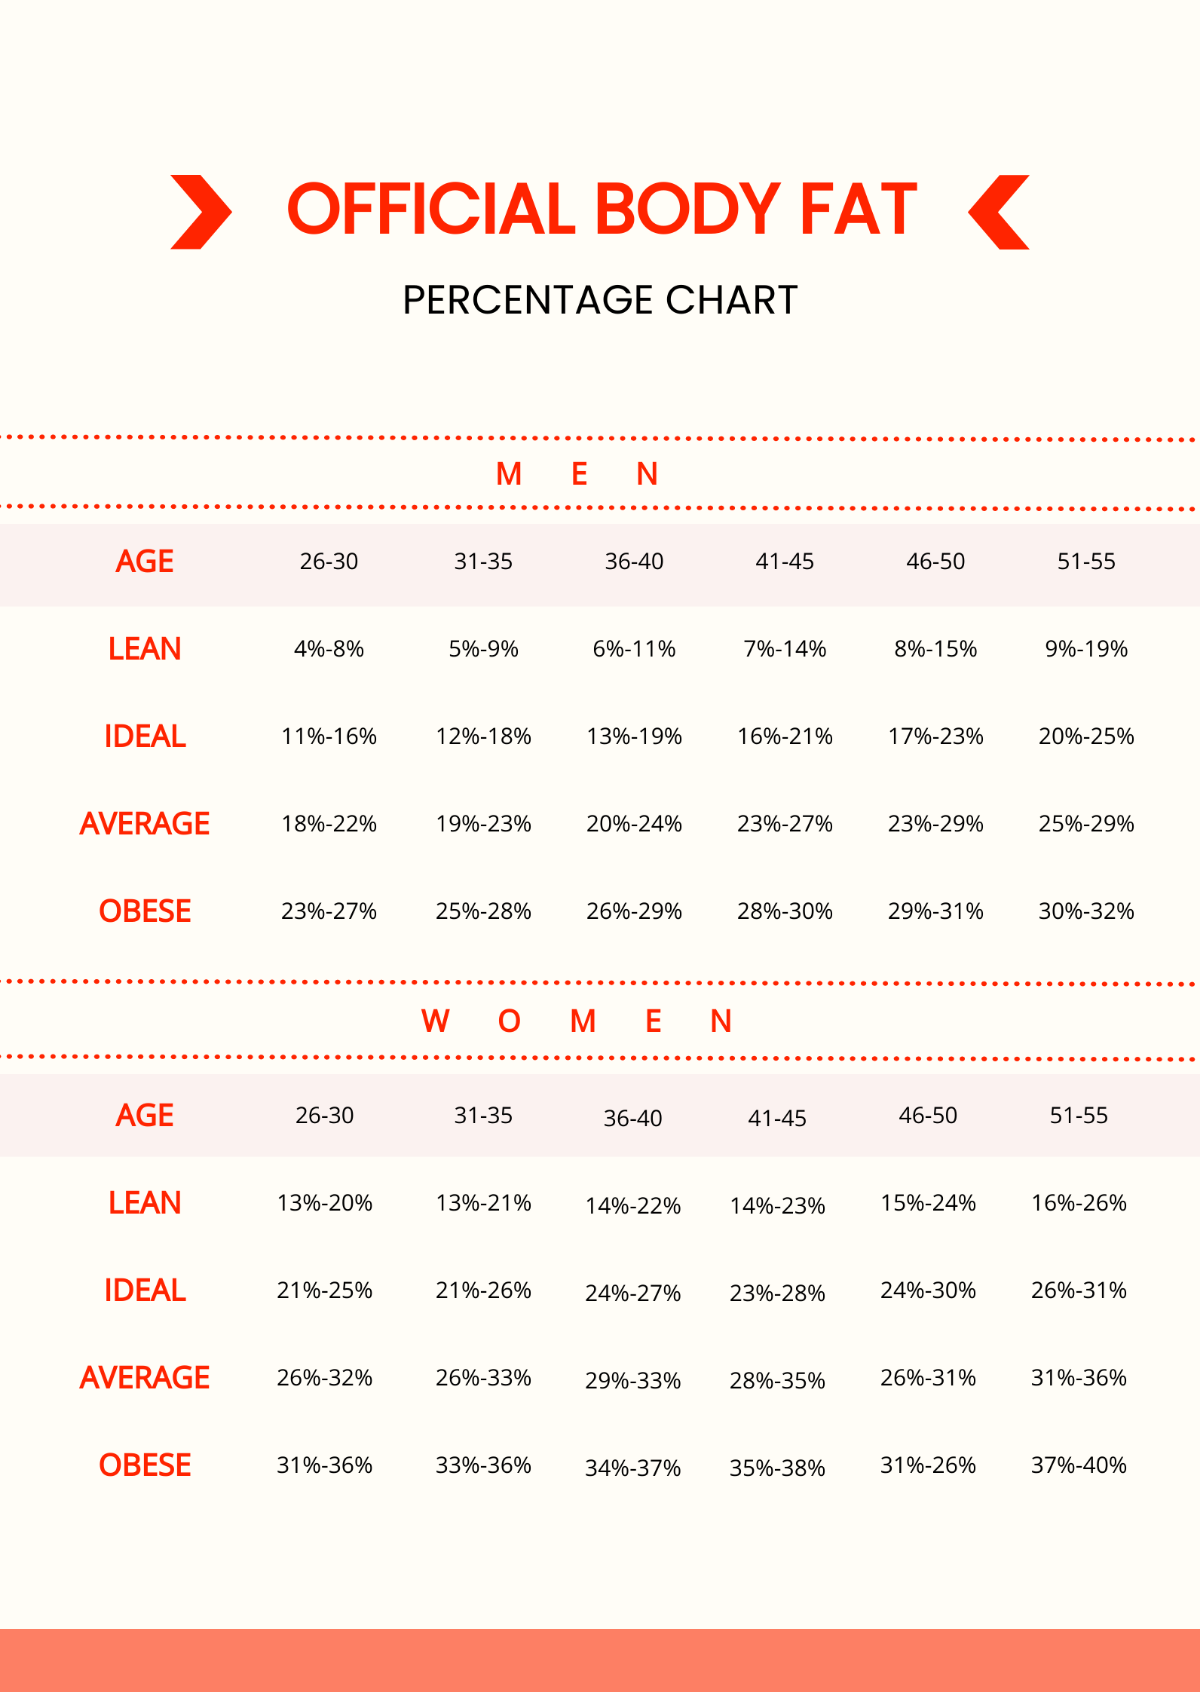 Official Body Fat Percentage Chart Template